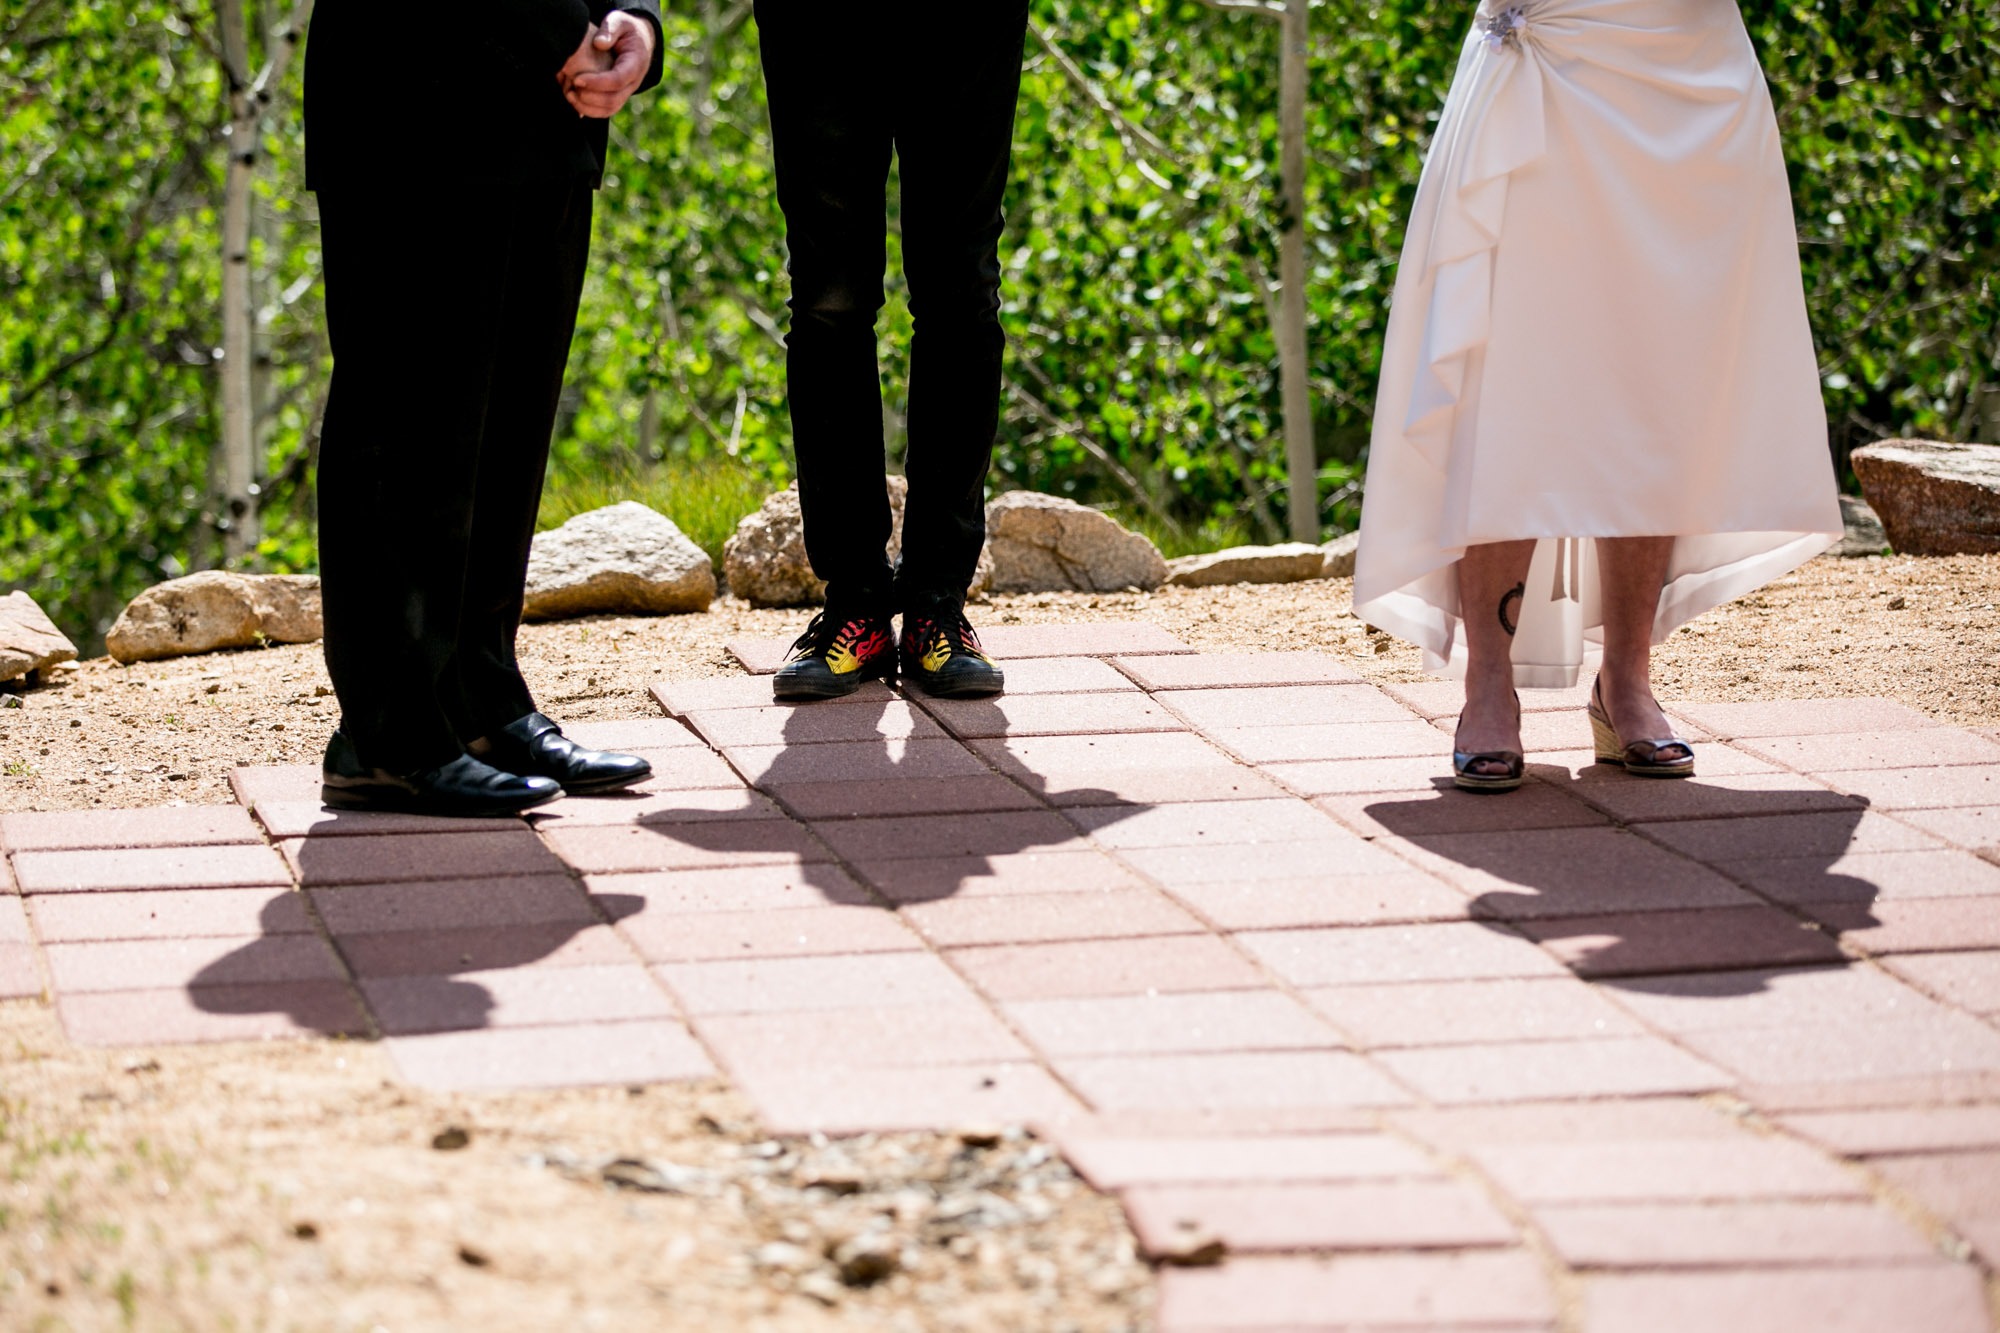 the legs of two men and one women with their shadows projecting on pavers